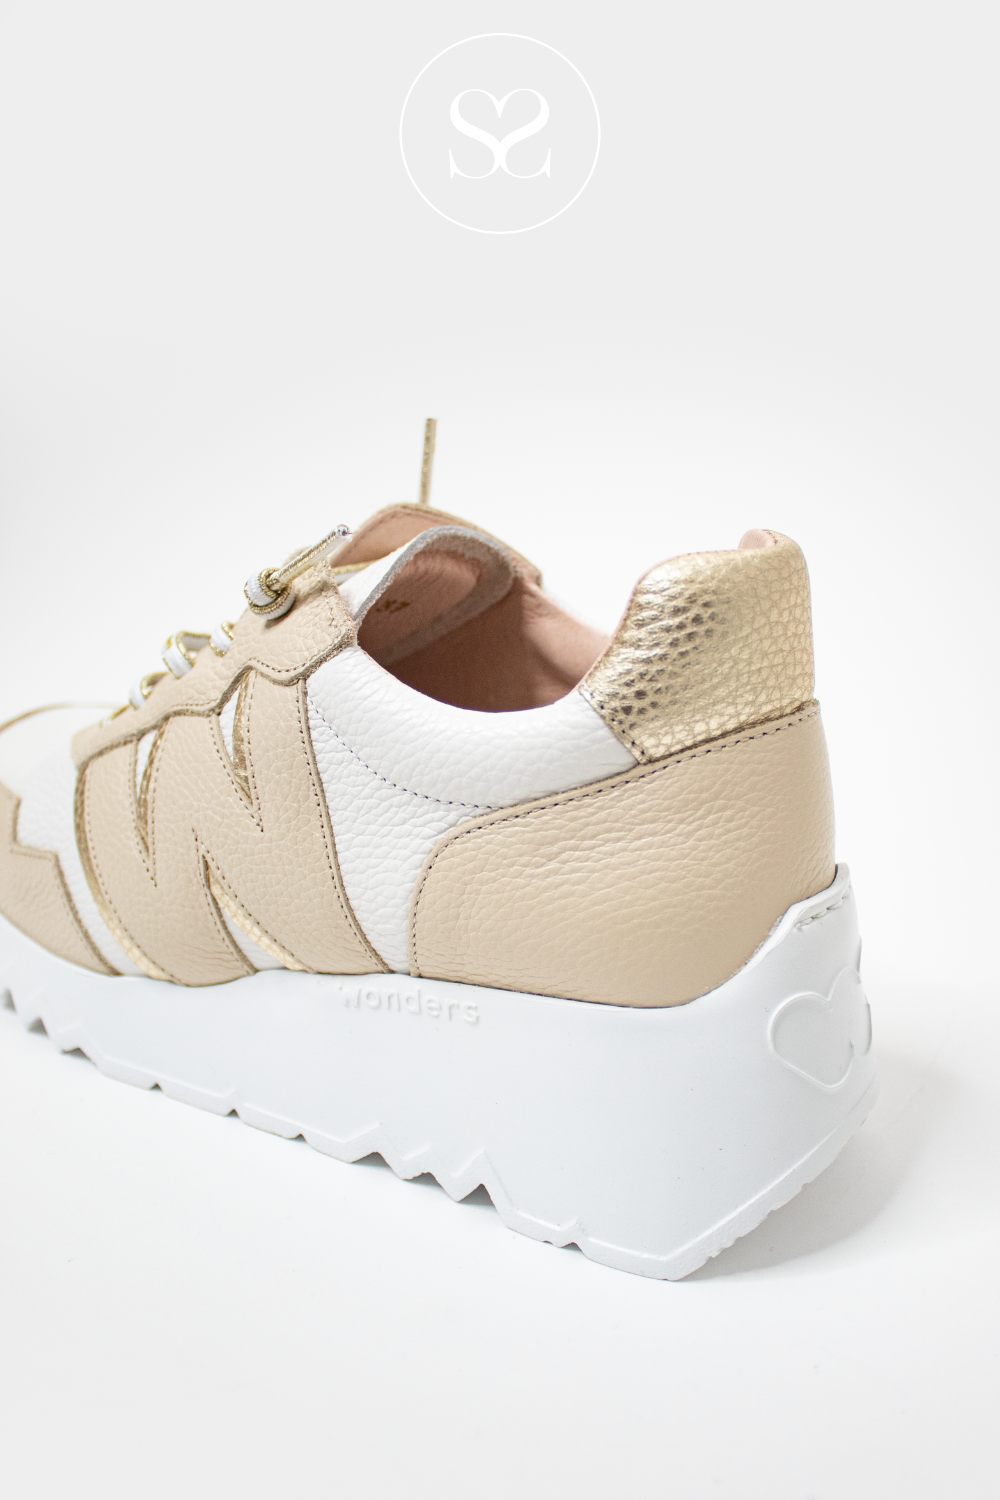 WONDERS E-6741 BEIGE WEDGE TRAINERS WITH ELASTICATED LACES AND WHITE ELEVATED SOLE